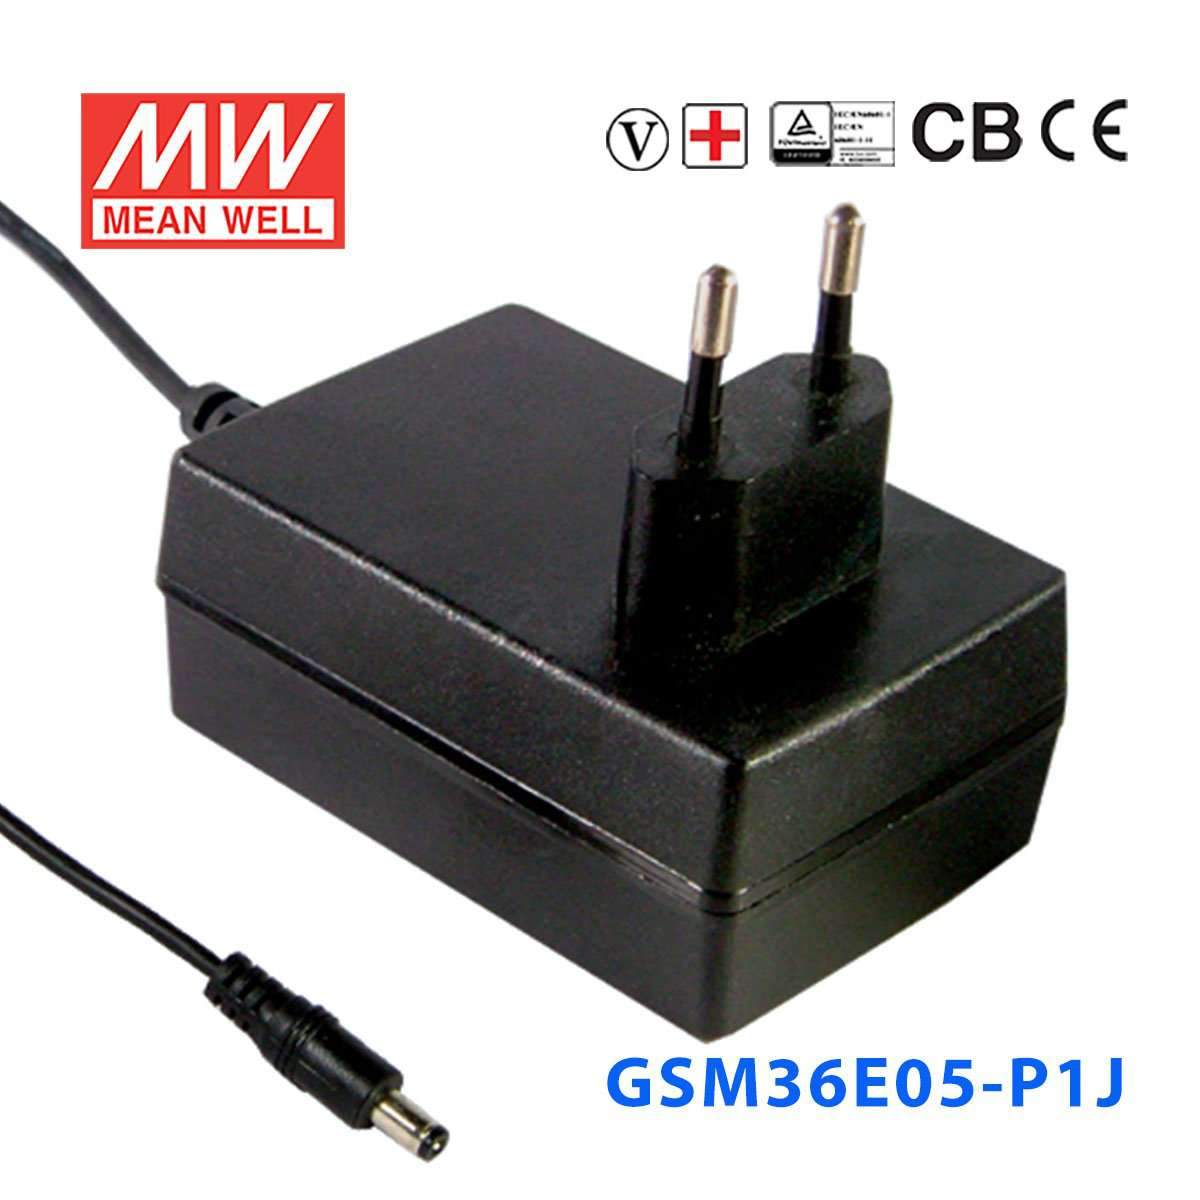 Mean Well GSM36E05-P1J Power Supply 22.5W 5V